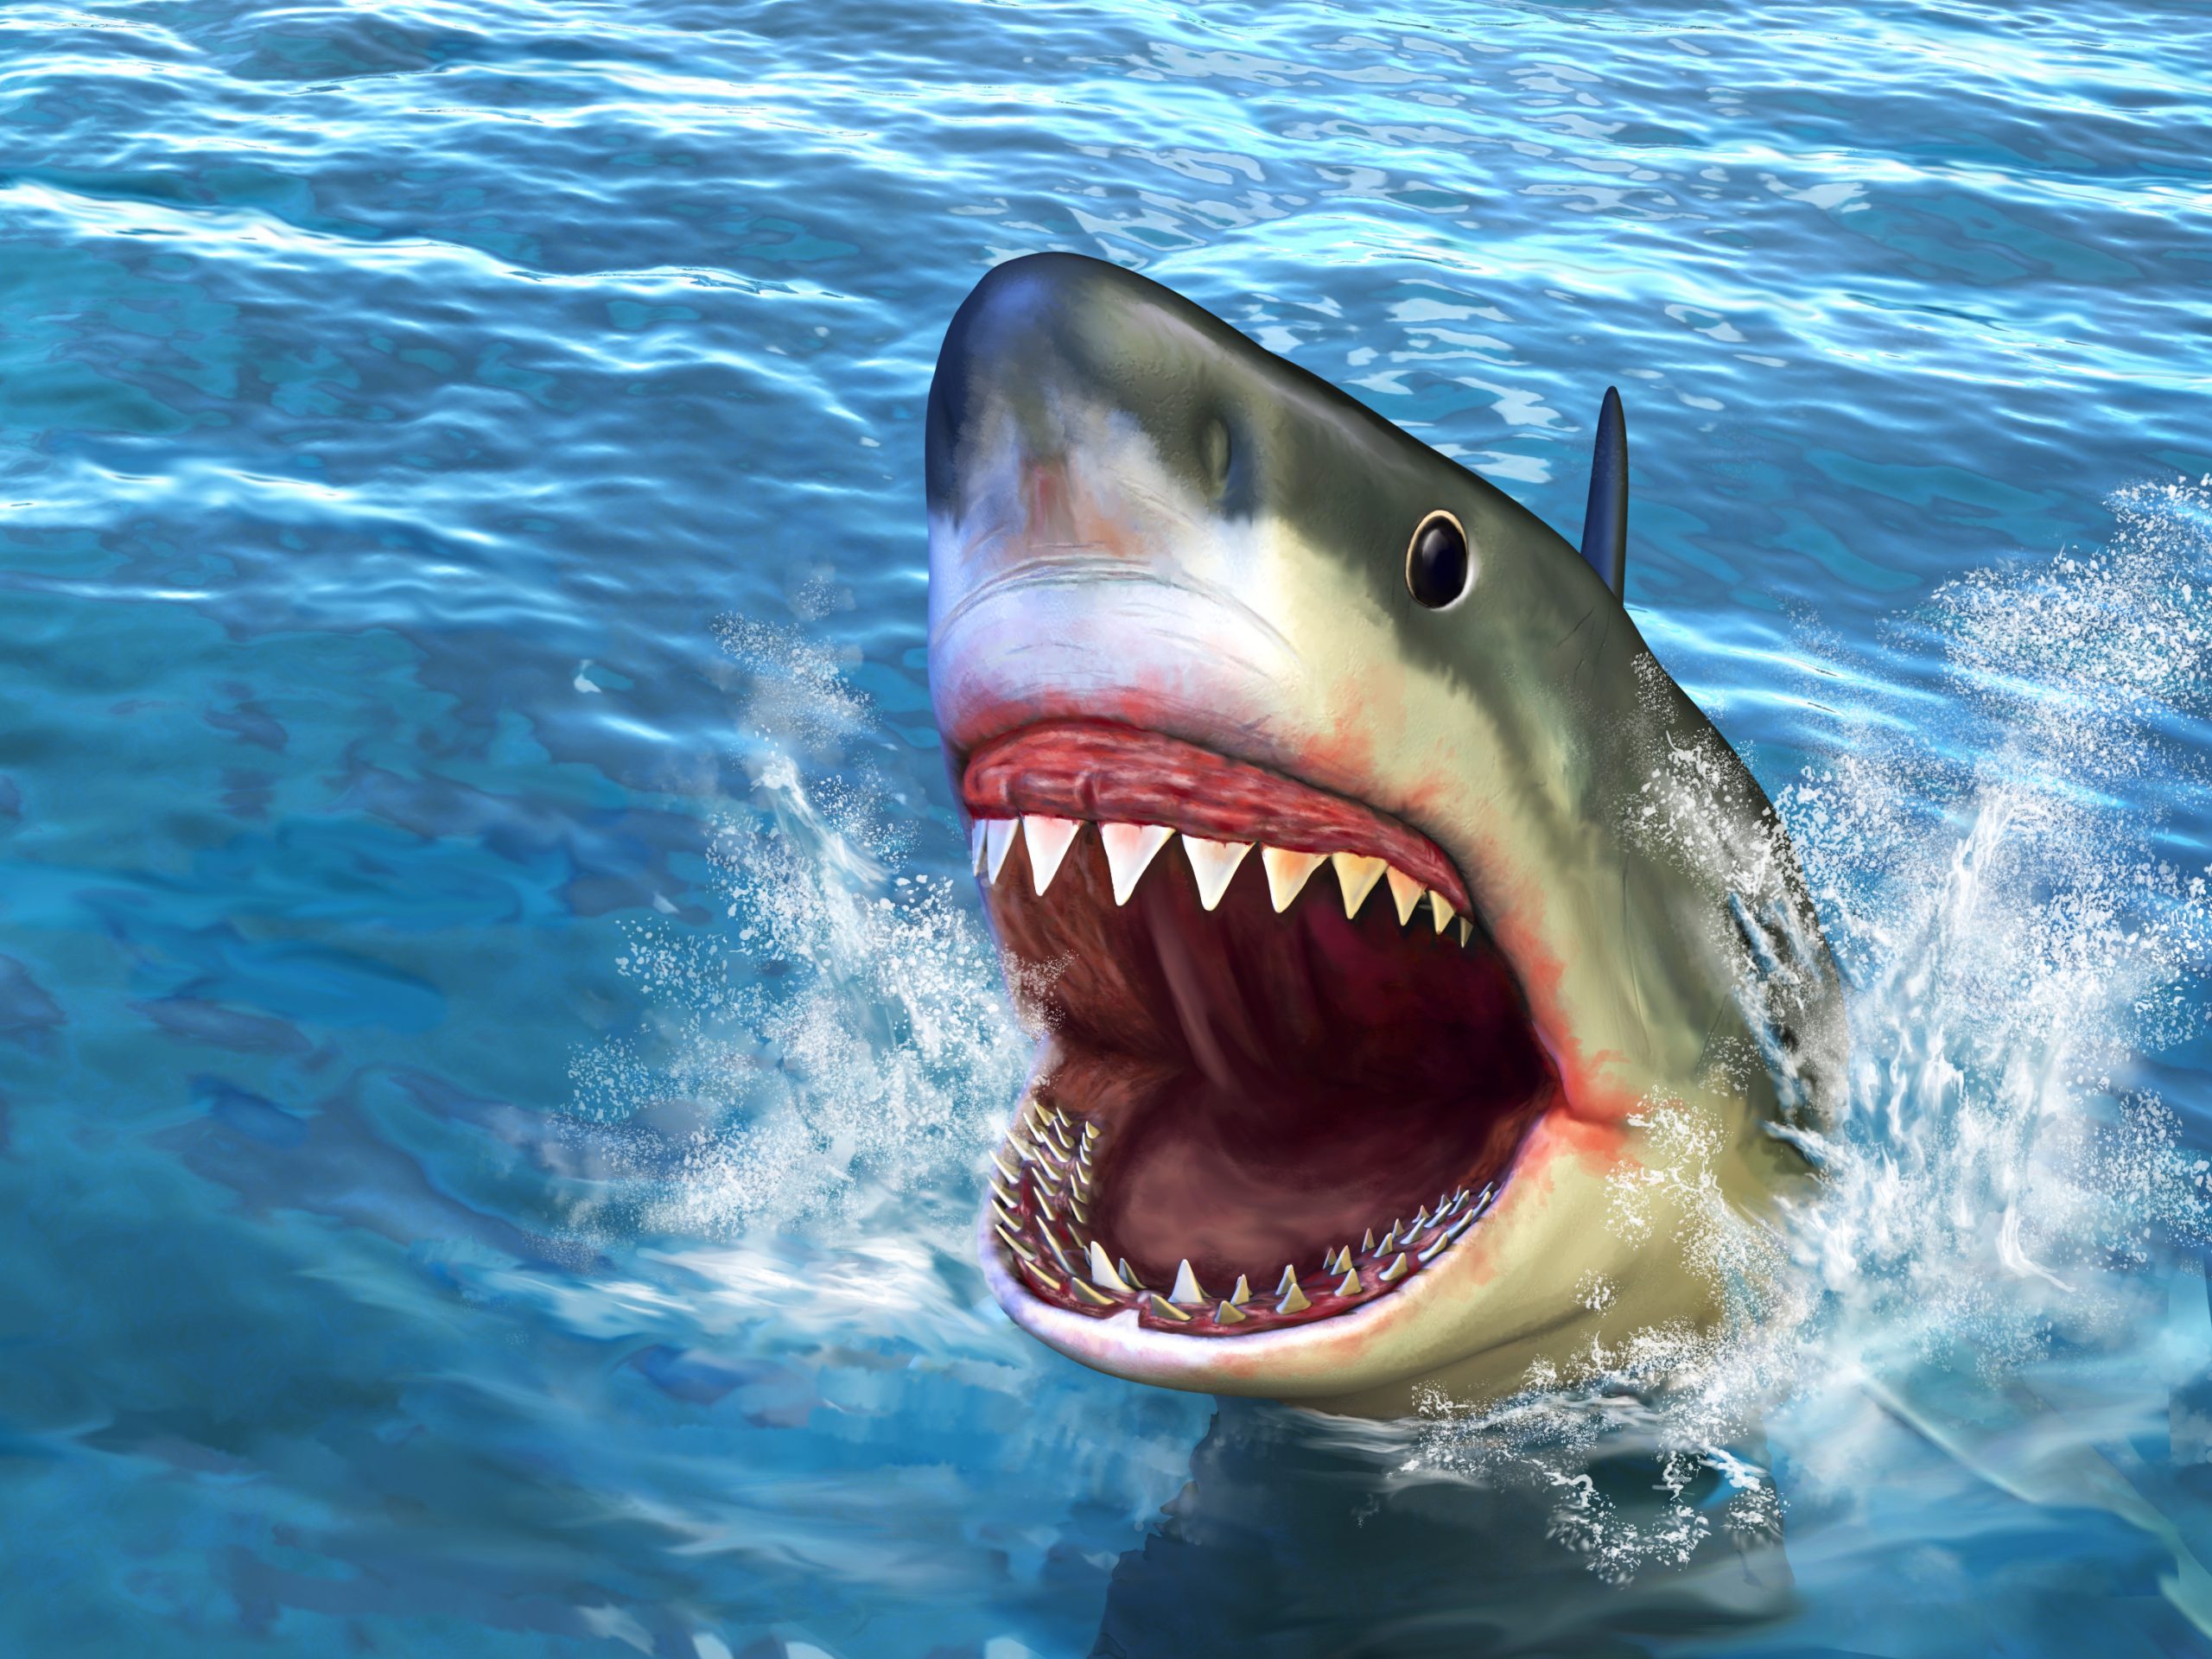 Great white shark jumping out of water with its open mouth. Digital illustration.